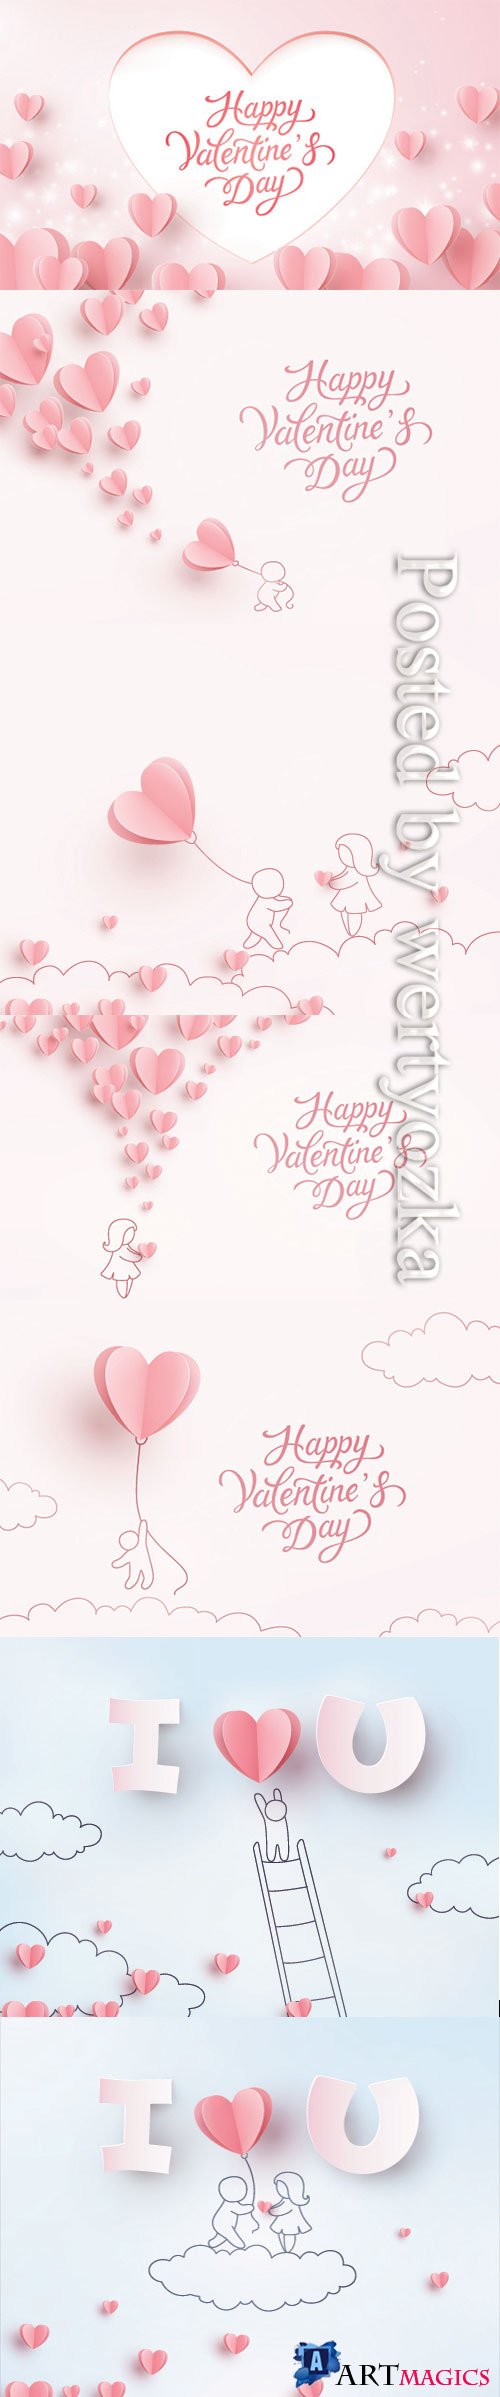 Happy Valentine's Day, vector hearts of couples in love # 18